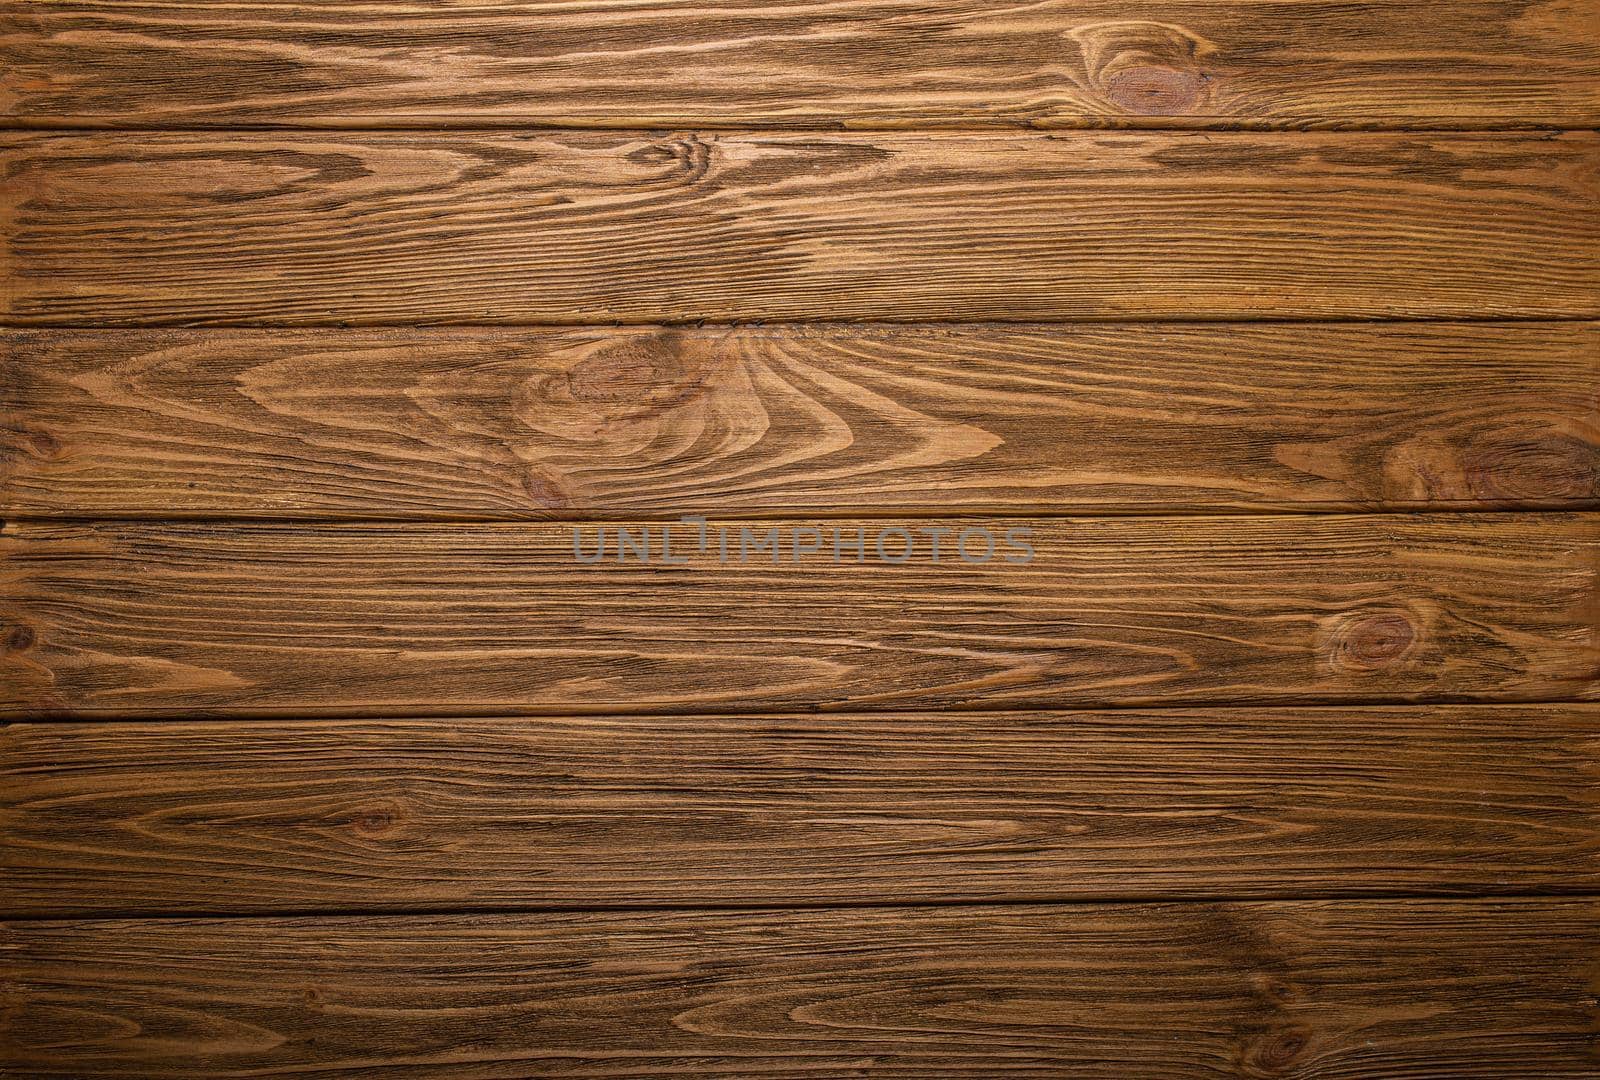 Light wooden panels rustic blank background or backdrop copy space by its_al_dente